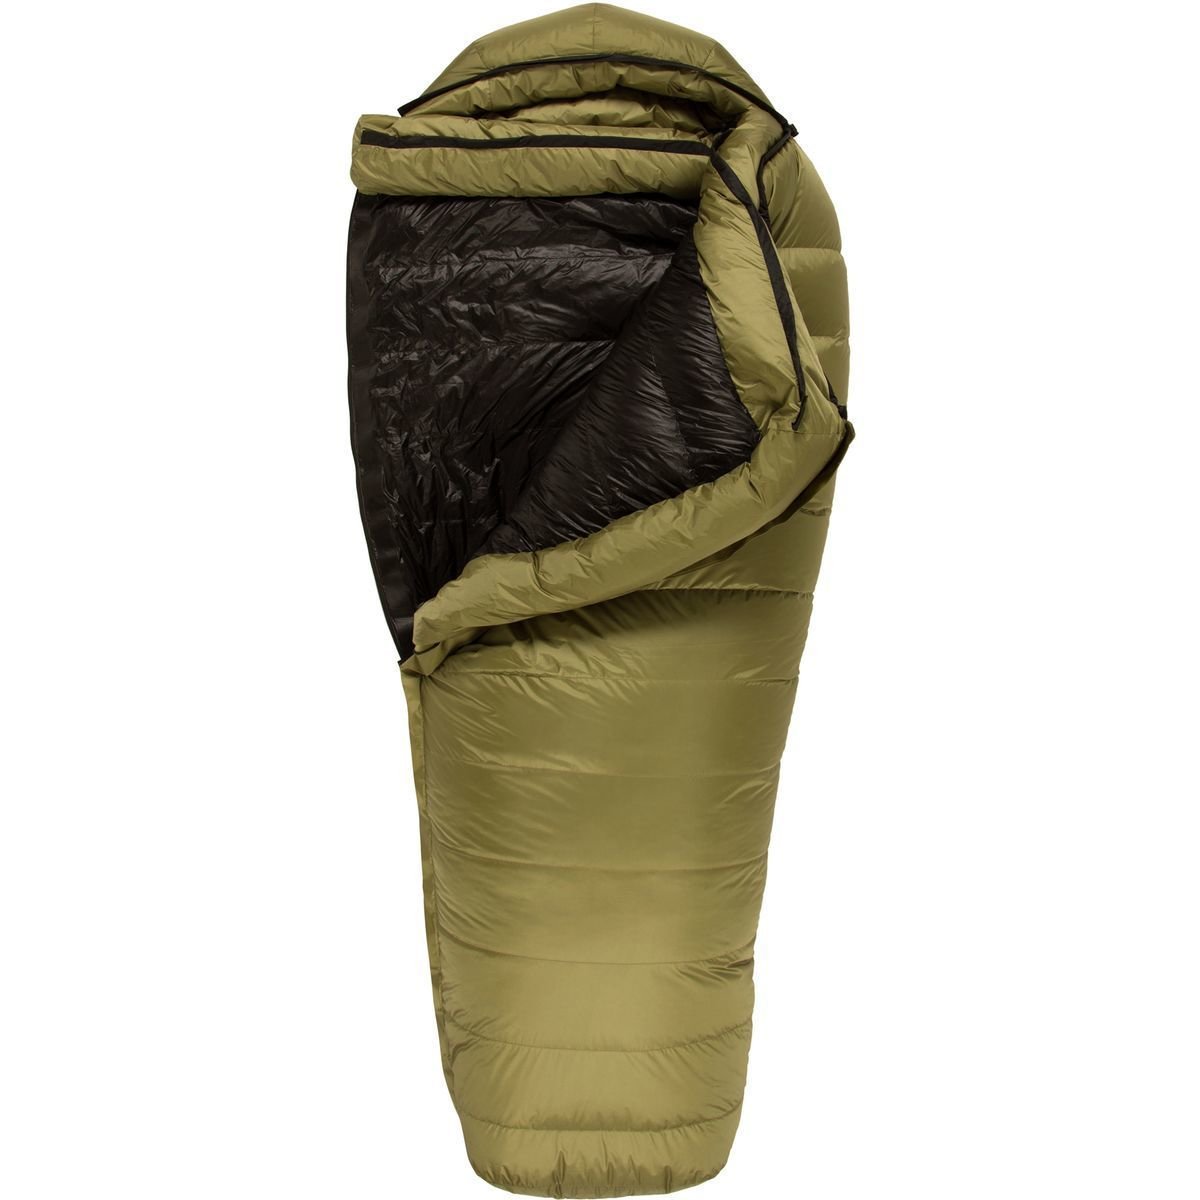 An image related to Western Mountaineering Cypress Gore WindStopper Sleeping Bag